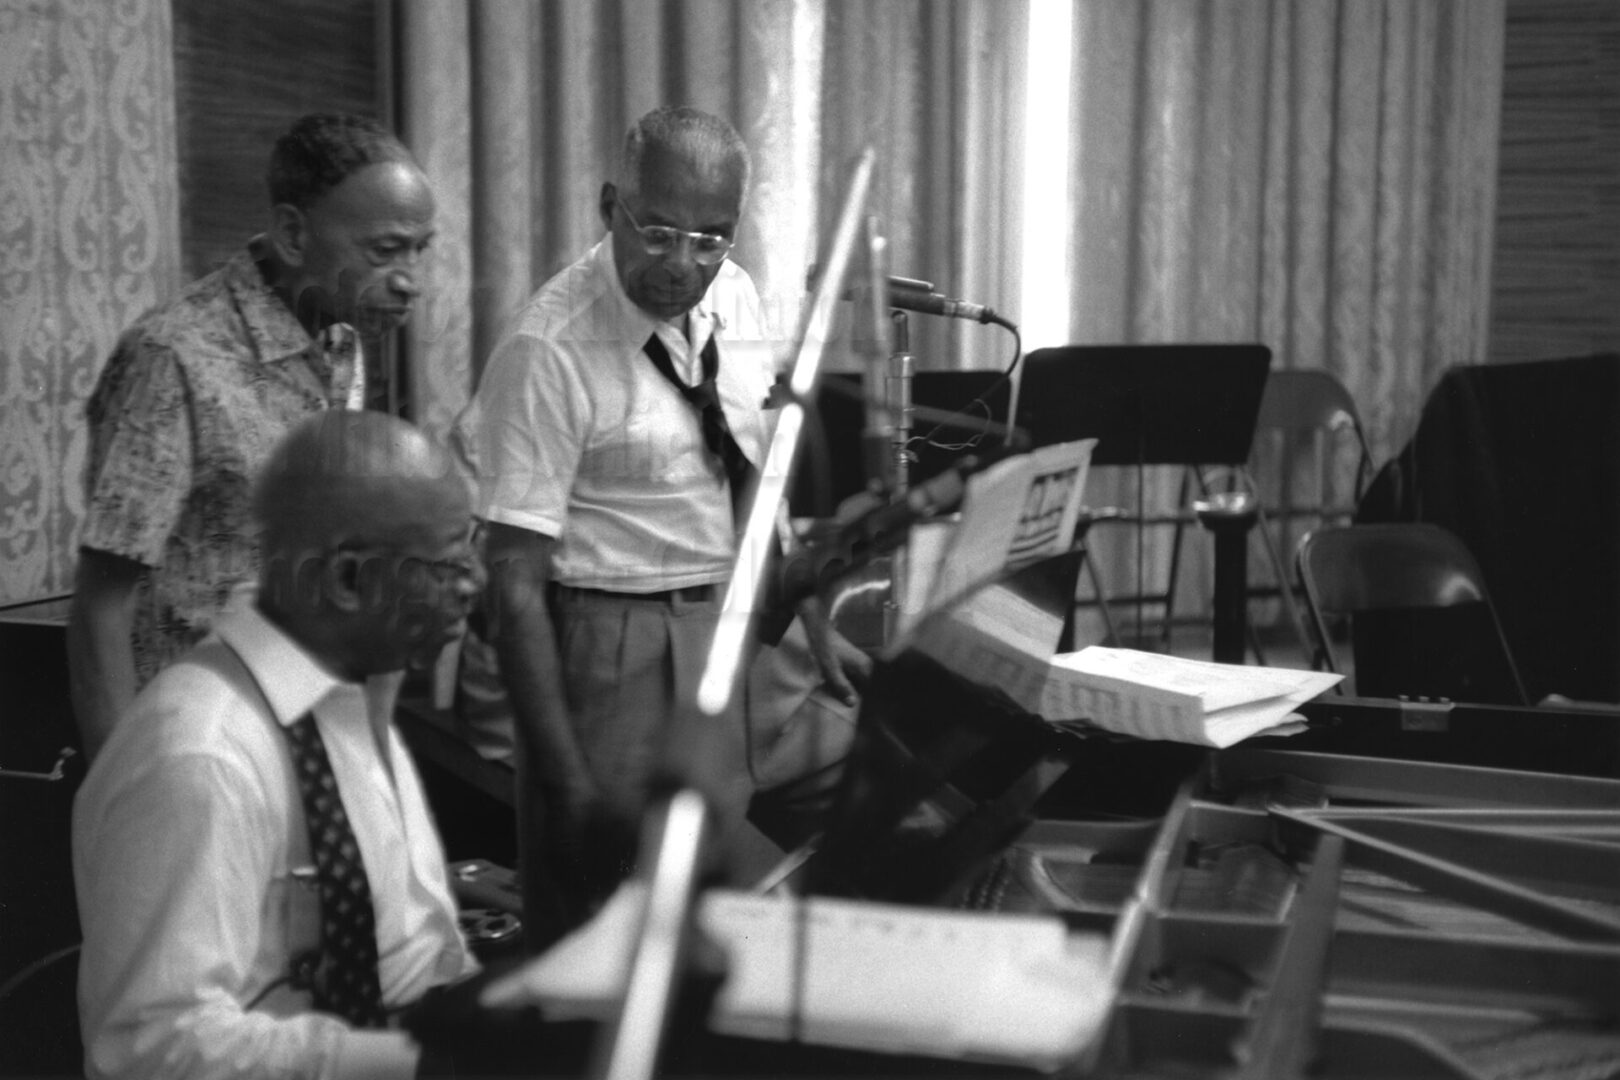 Photo by Milt Hinton<br>
© Milton J. Hinton<br>Photographic Collection <br><b class="captionn">Perry Bradford, Eubie Blake (at piano), and Noble Sissle, NYC c. 1958</b>